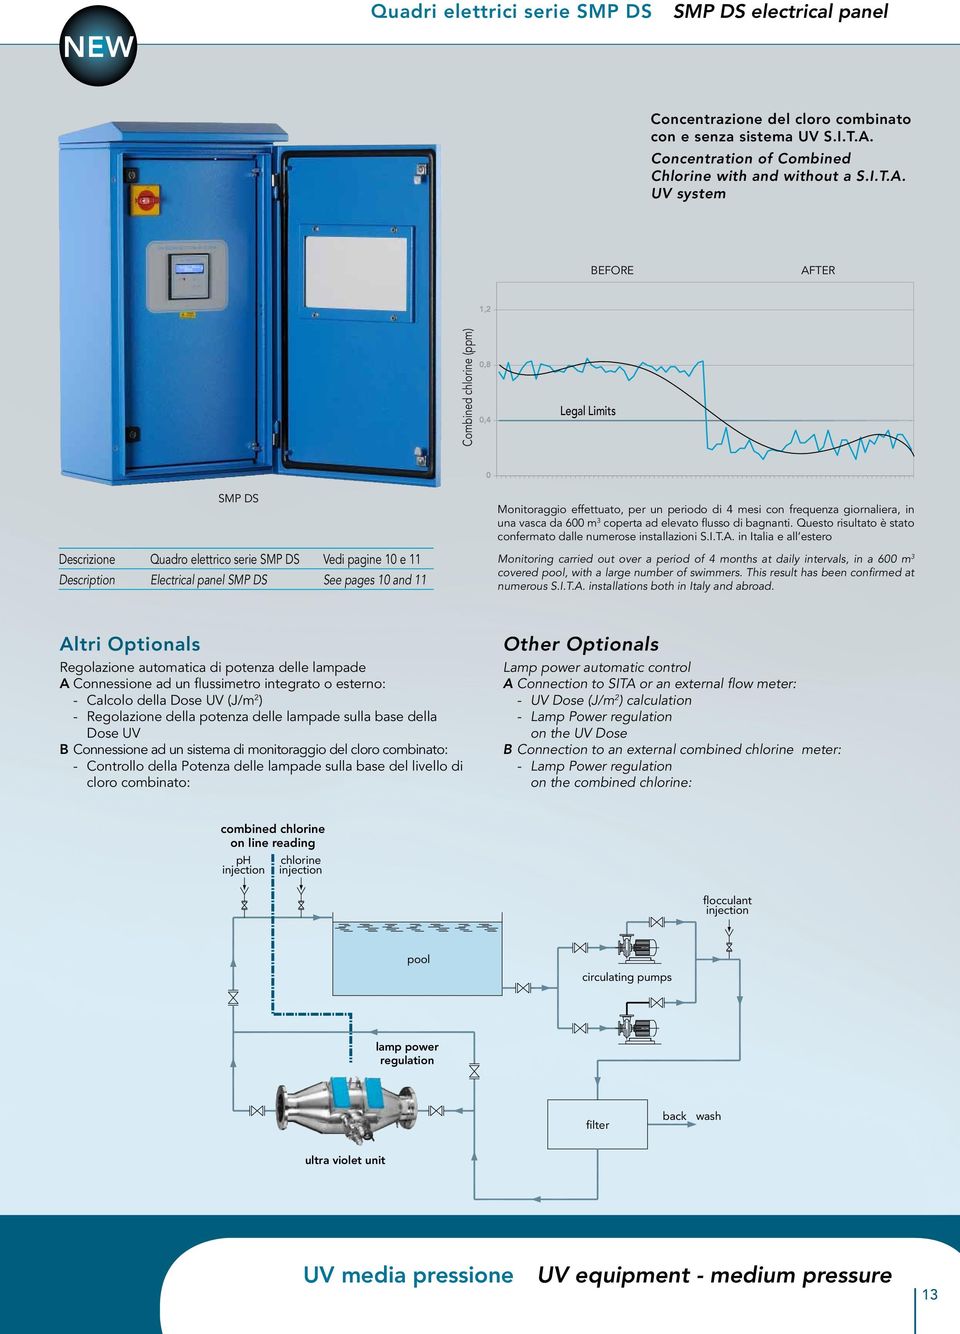 UV system BEFORE AFTER Combined chlorine (ppm) Legal Limits SMP DS Descrizione Quadro elettrico serie SMP DS Vedi pagine 10 e 11 Description Electrical panel SMP DS See pages 10 and 11 Monitoraggio